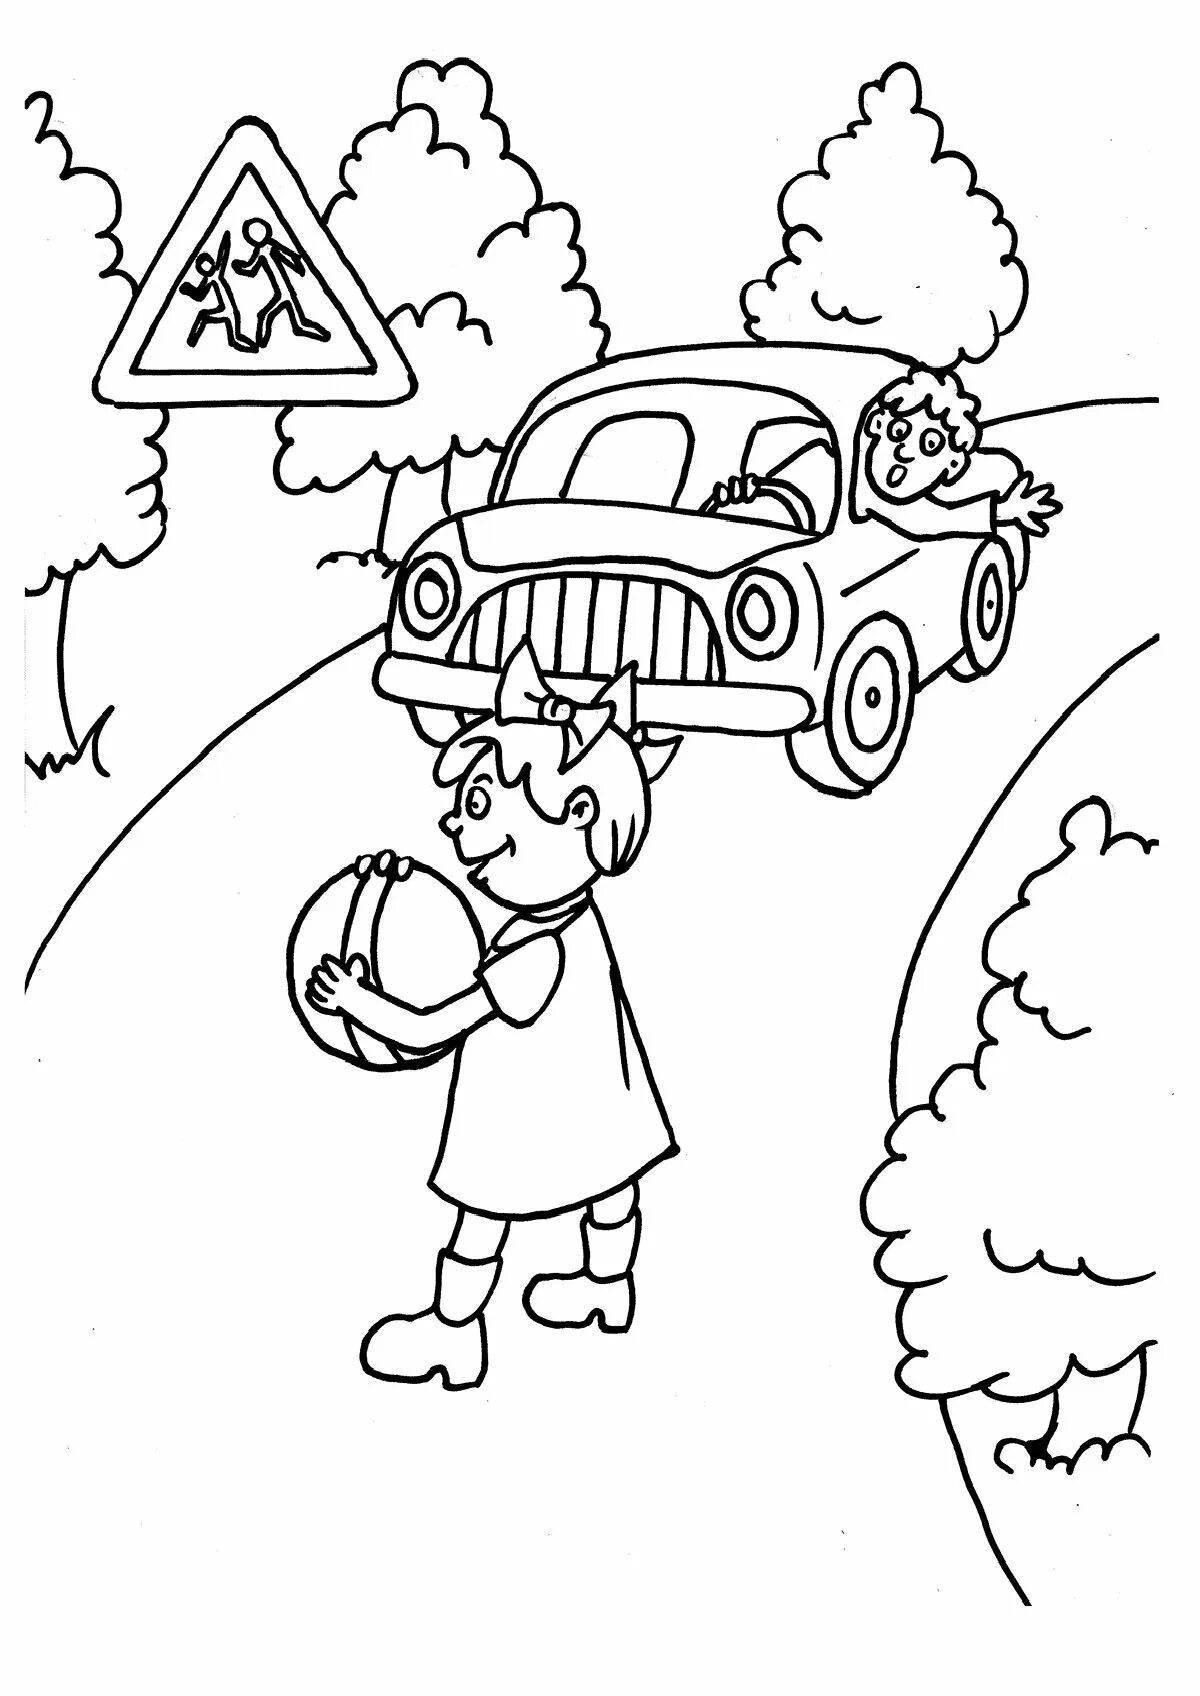 Creative pre-k traffic rules coloring page